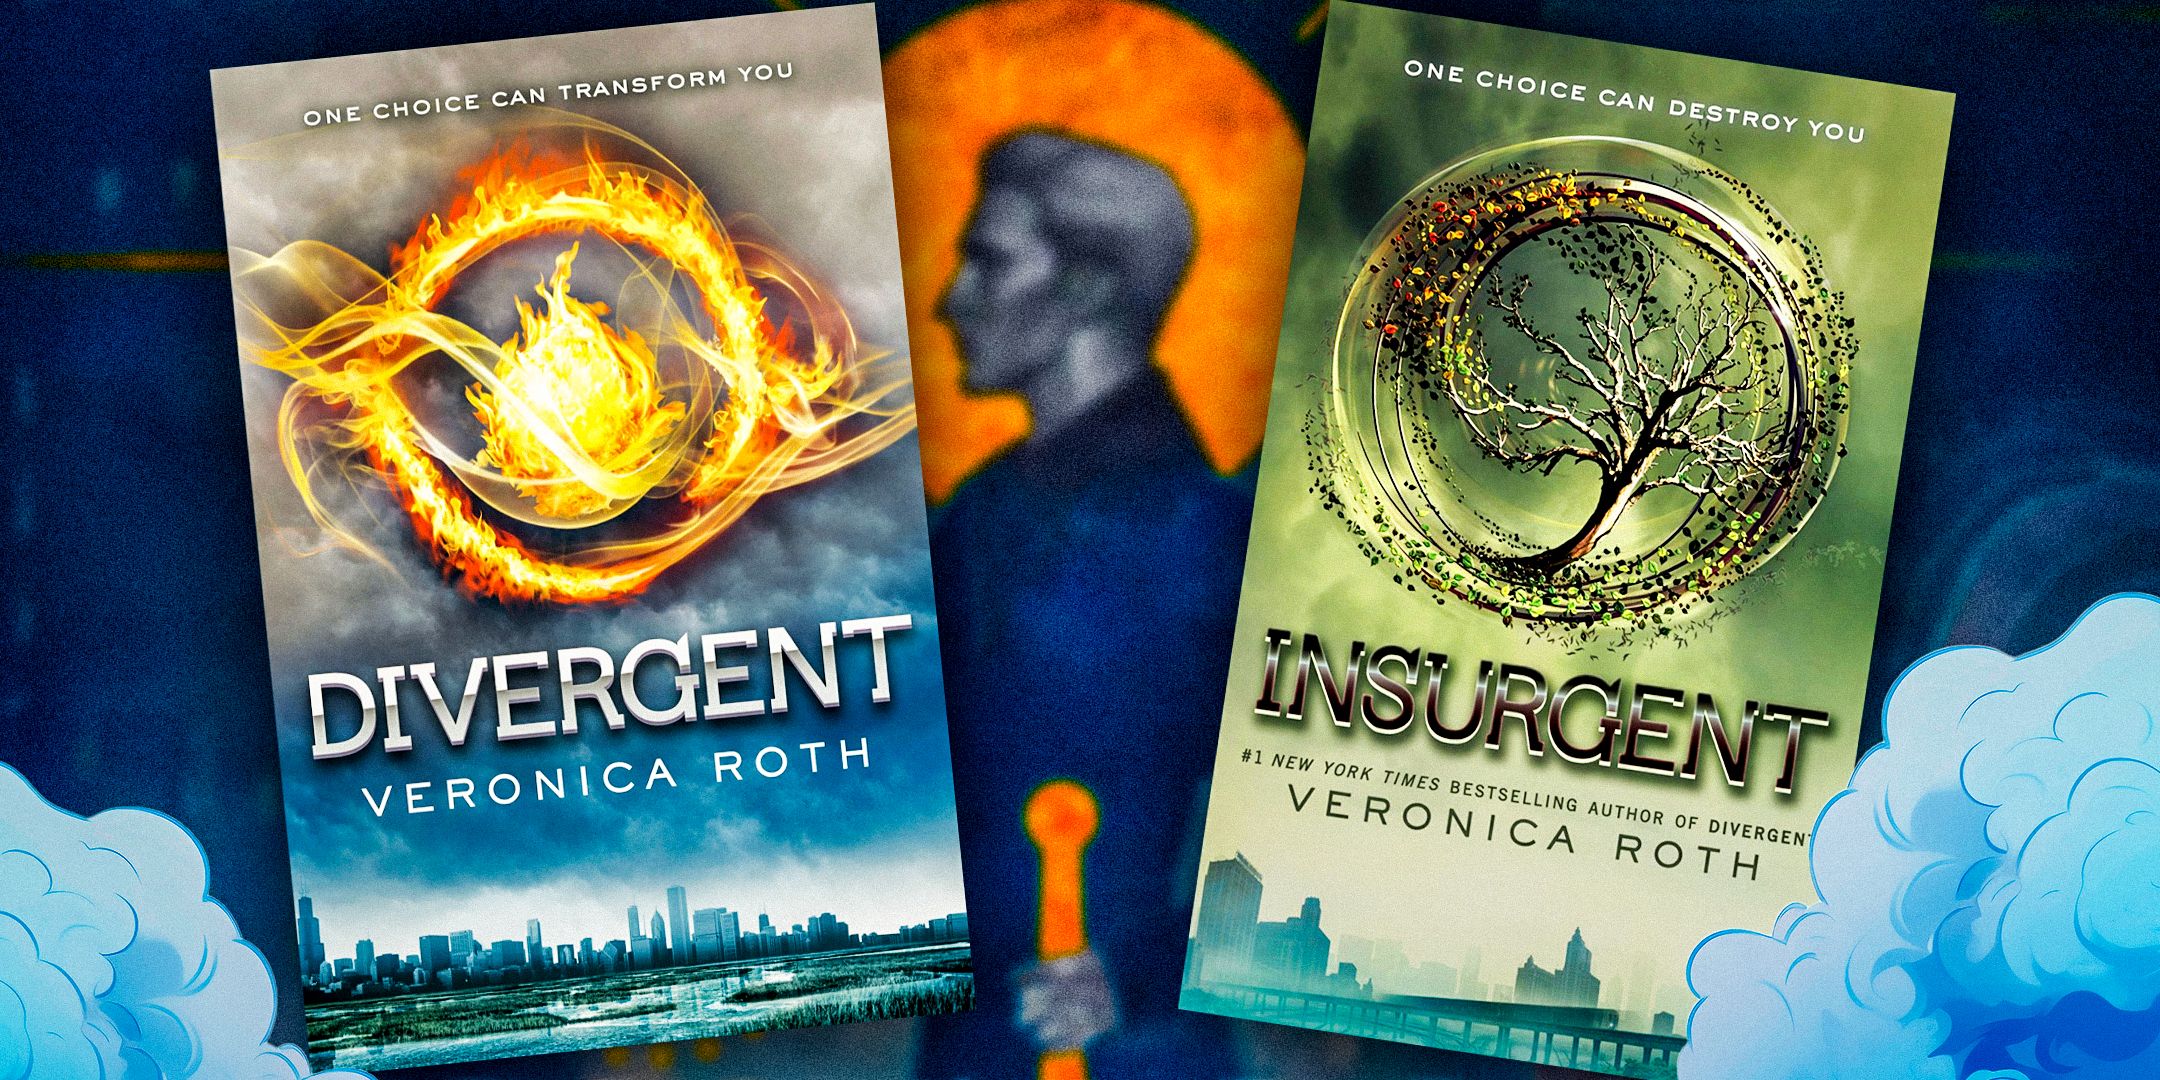 The covers of Divergent and Allegiant layered over imagery from When Among Crows